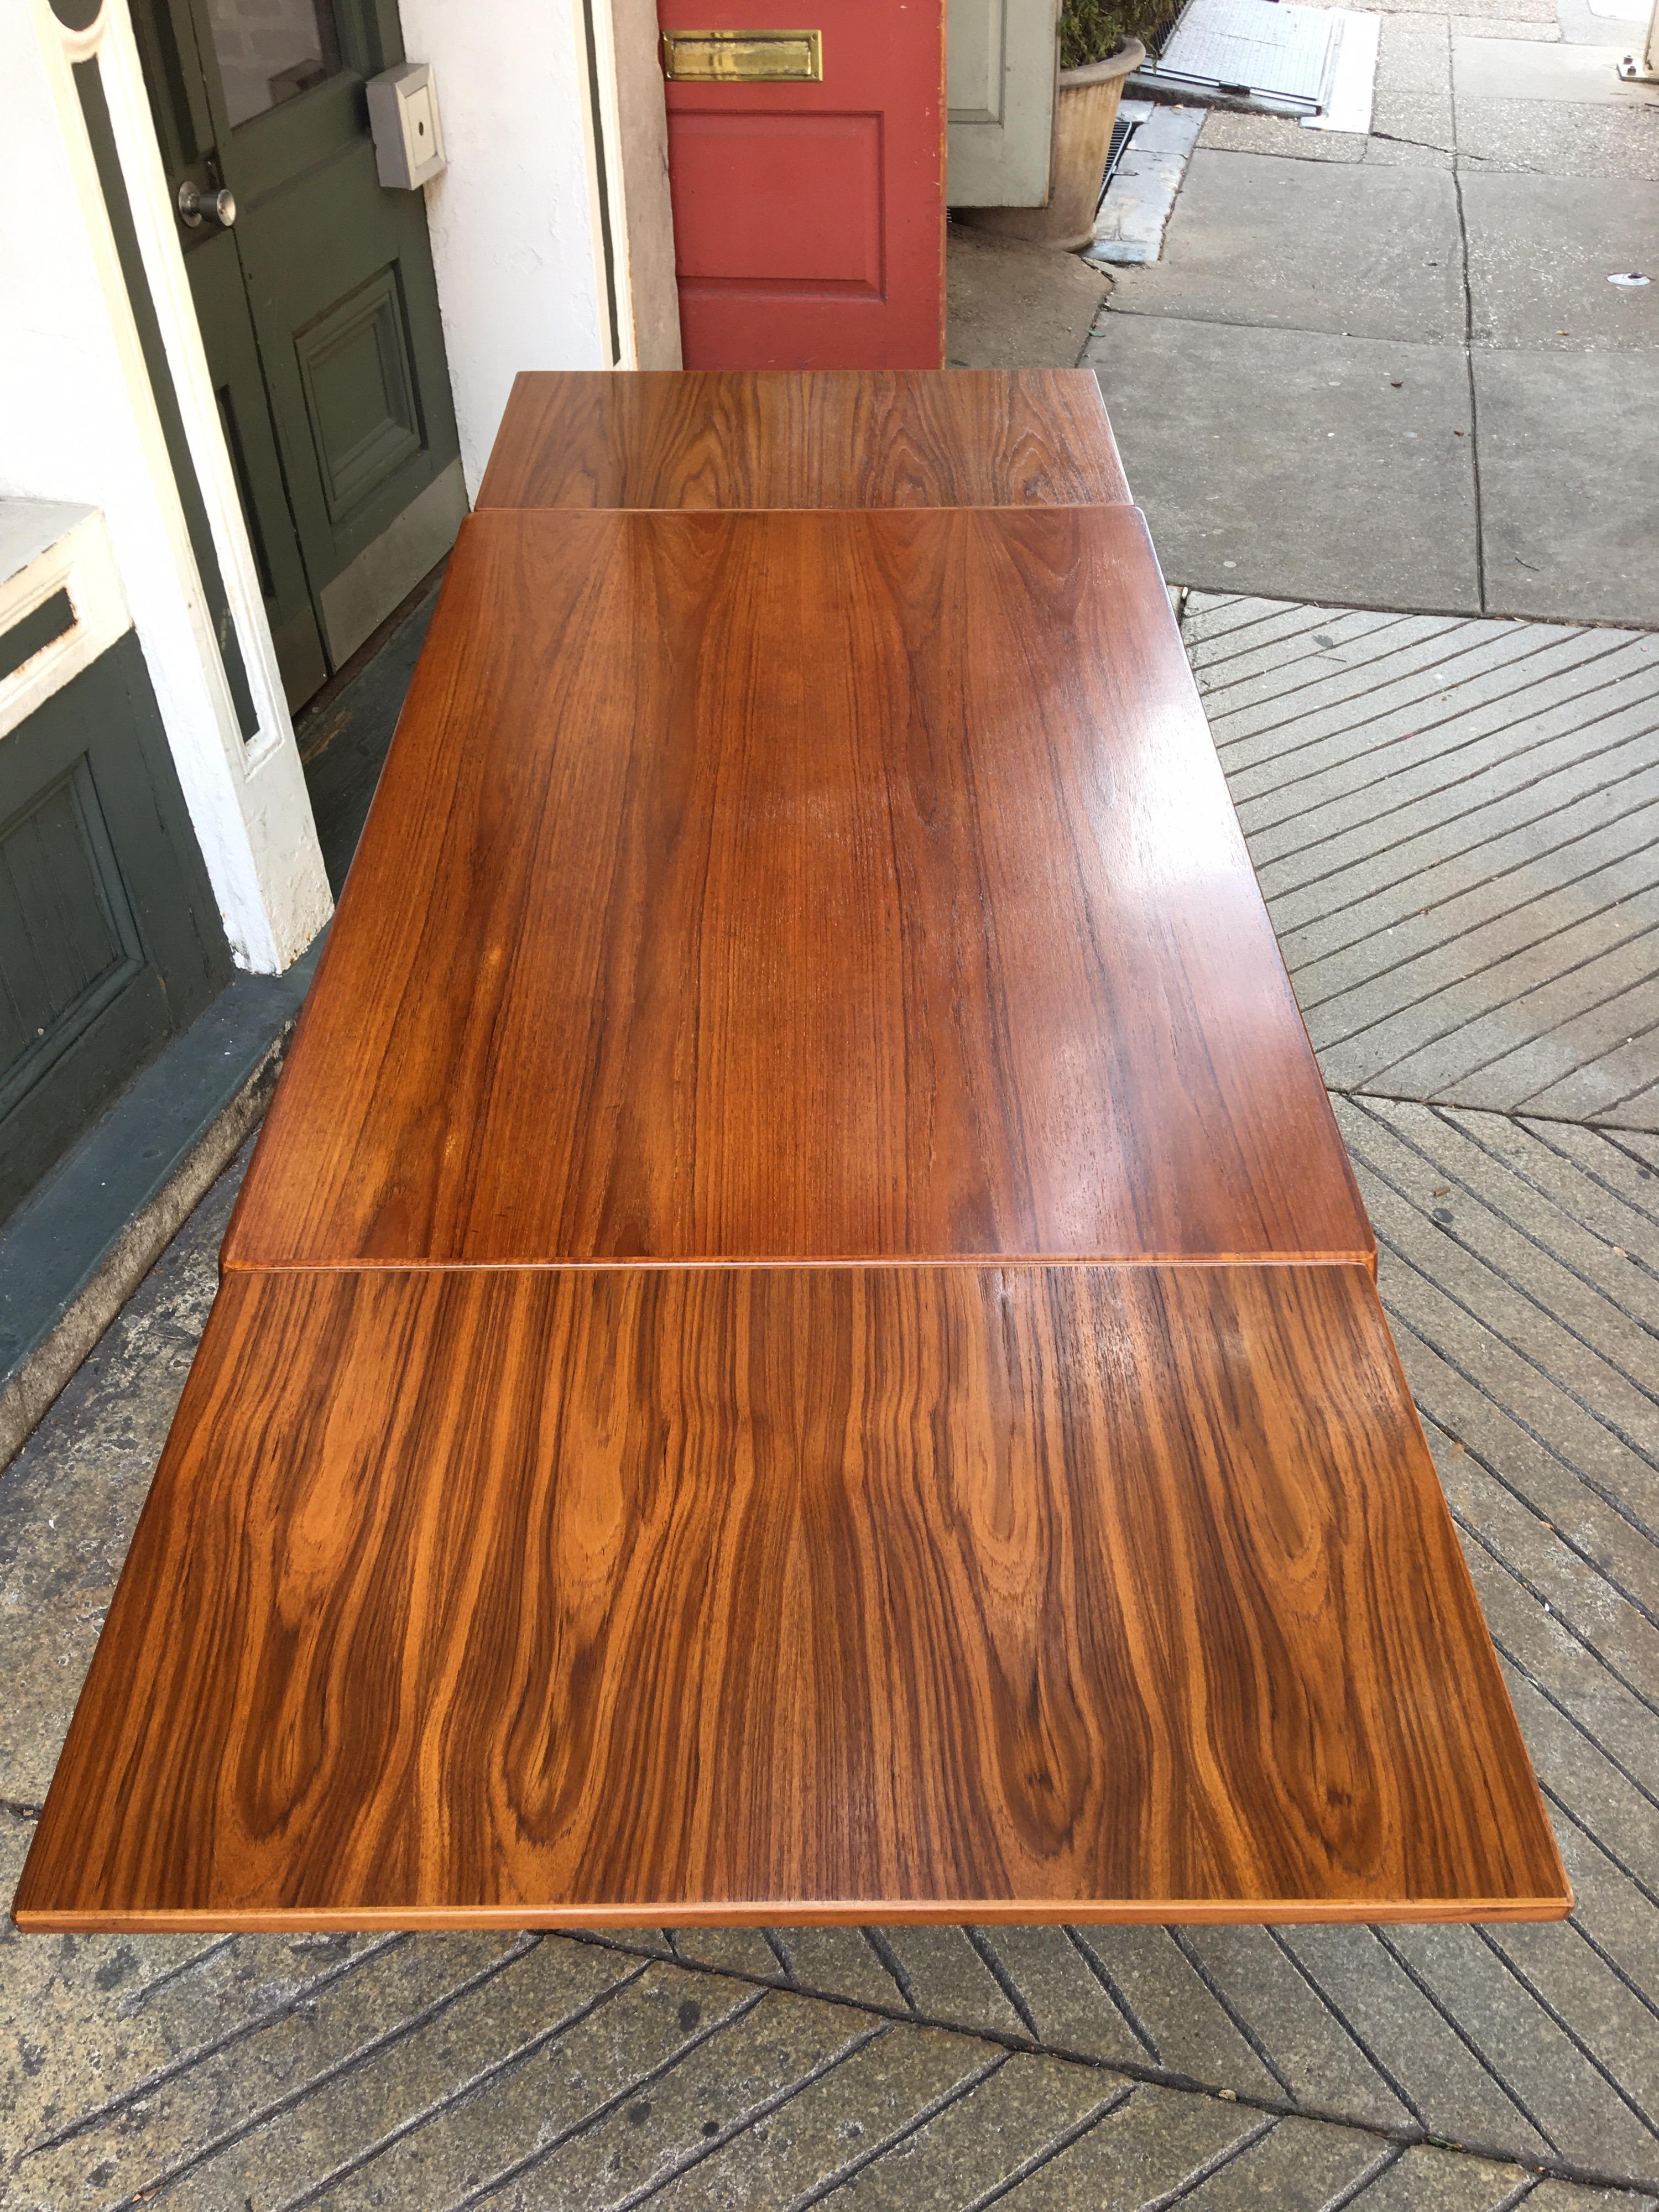 Mid-20th Century Teak Dining Table with Hidden Self Storing Leaves